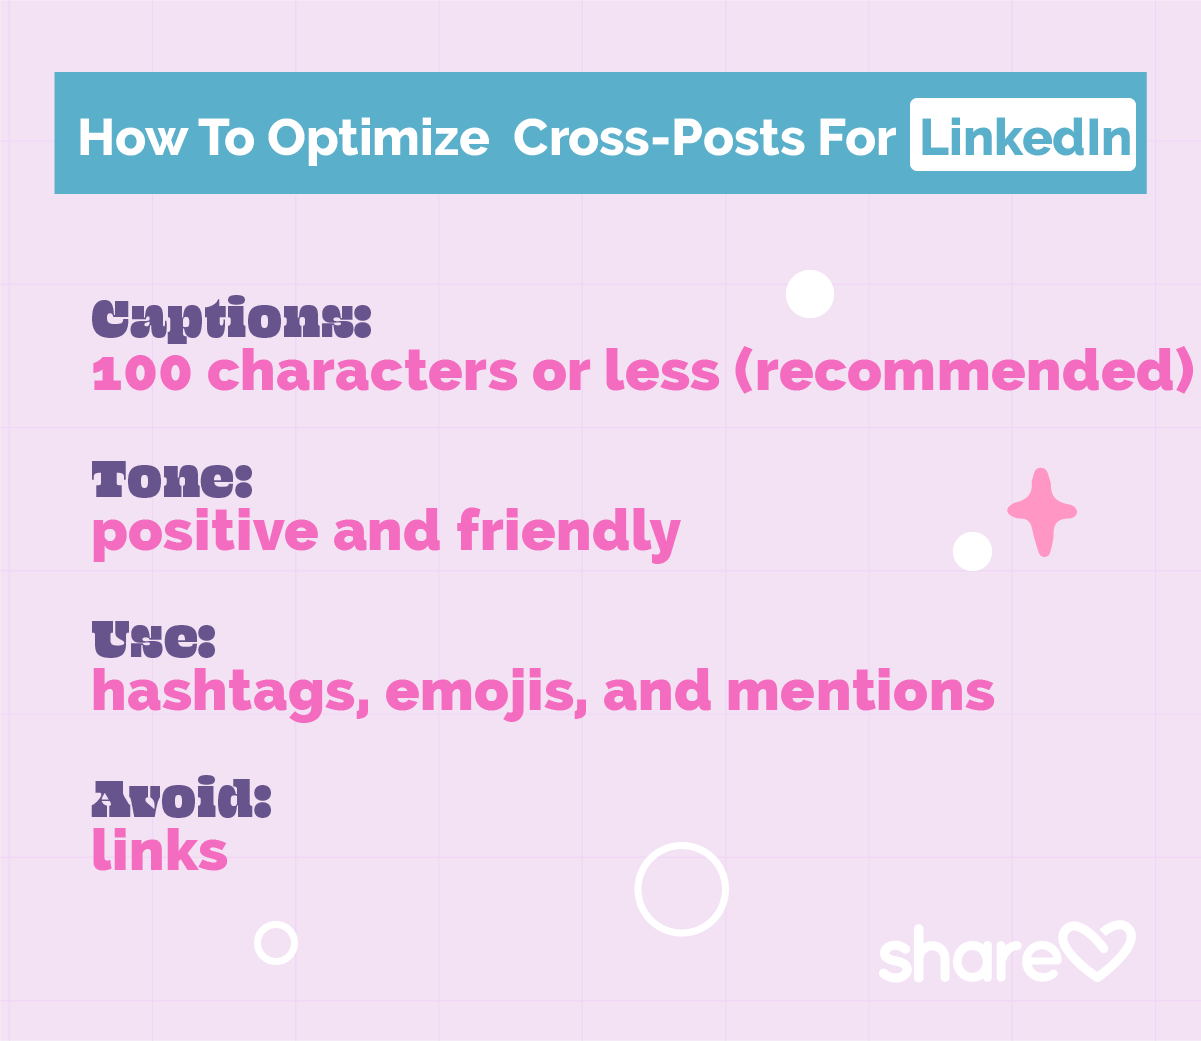  How To Optimize Cross-Posts For LinkedIn